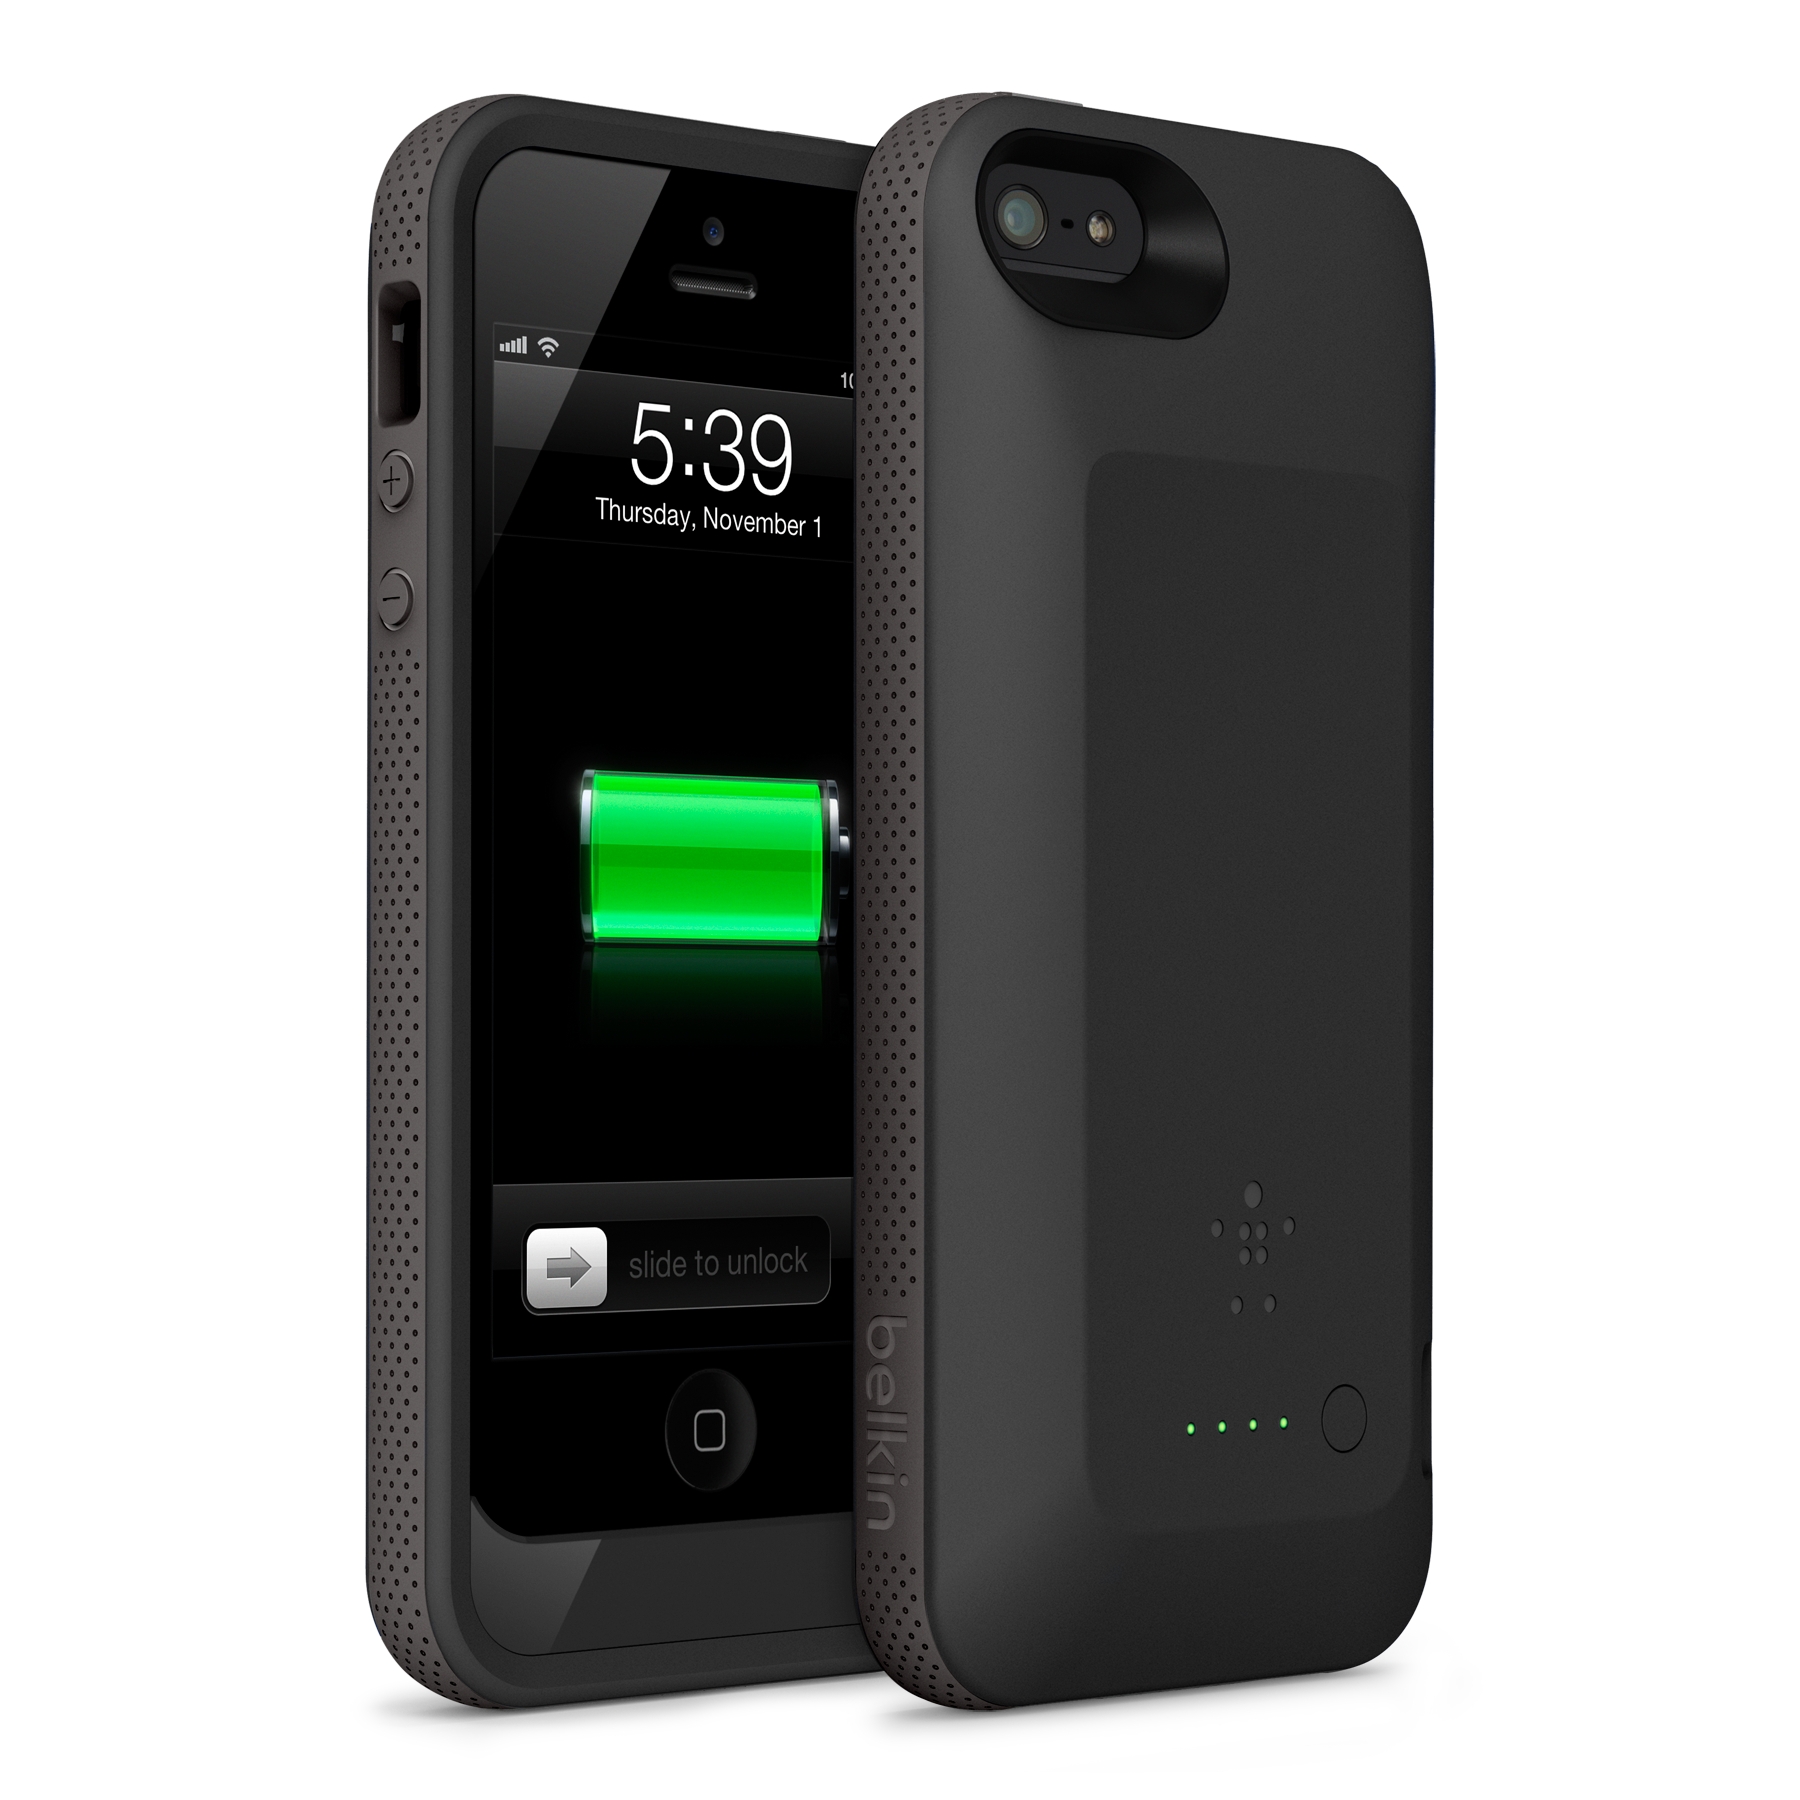 Top Battery Cases for iPhone 5/5S